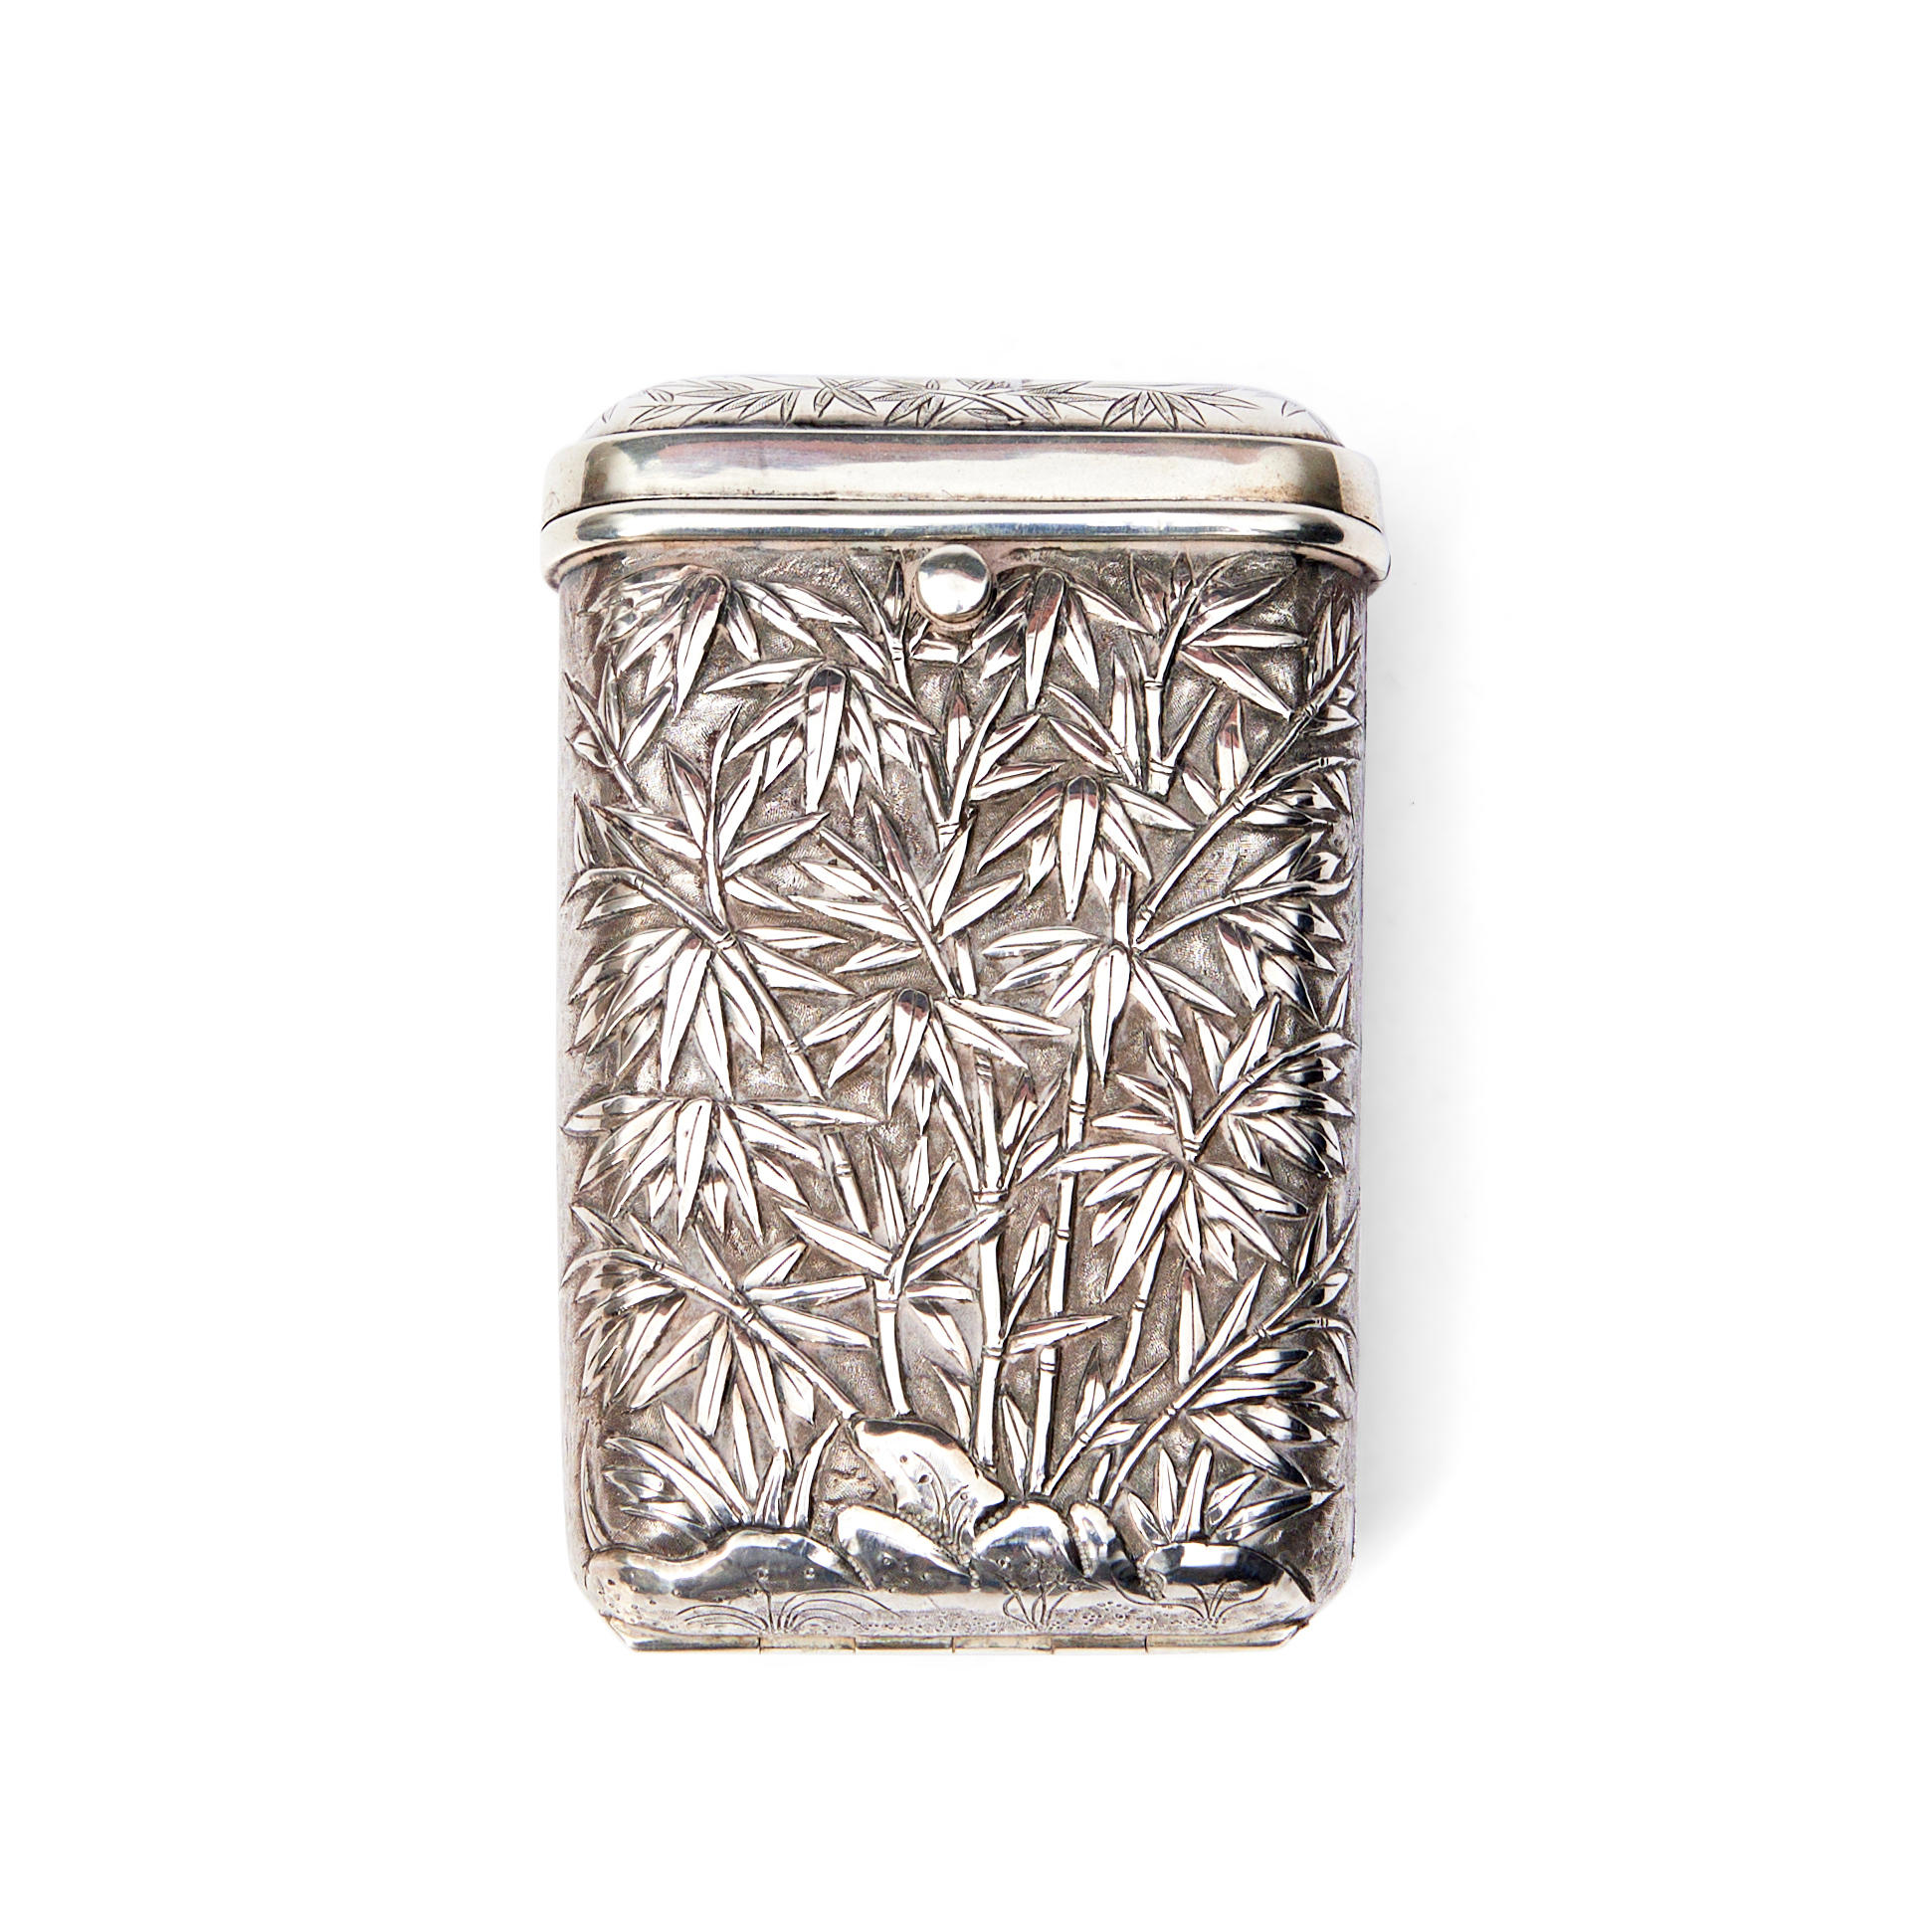 CHINESE EXPORT SILVER CHEROOT CASE  3aea73